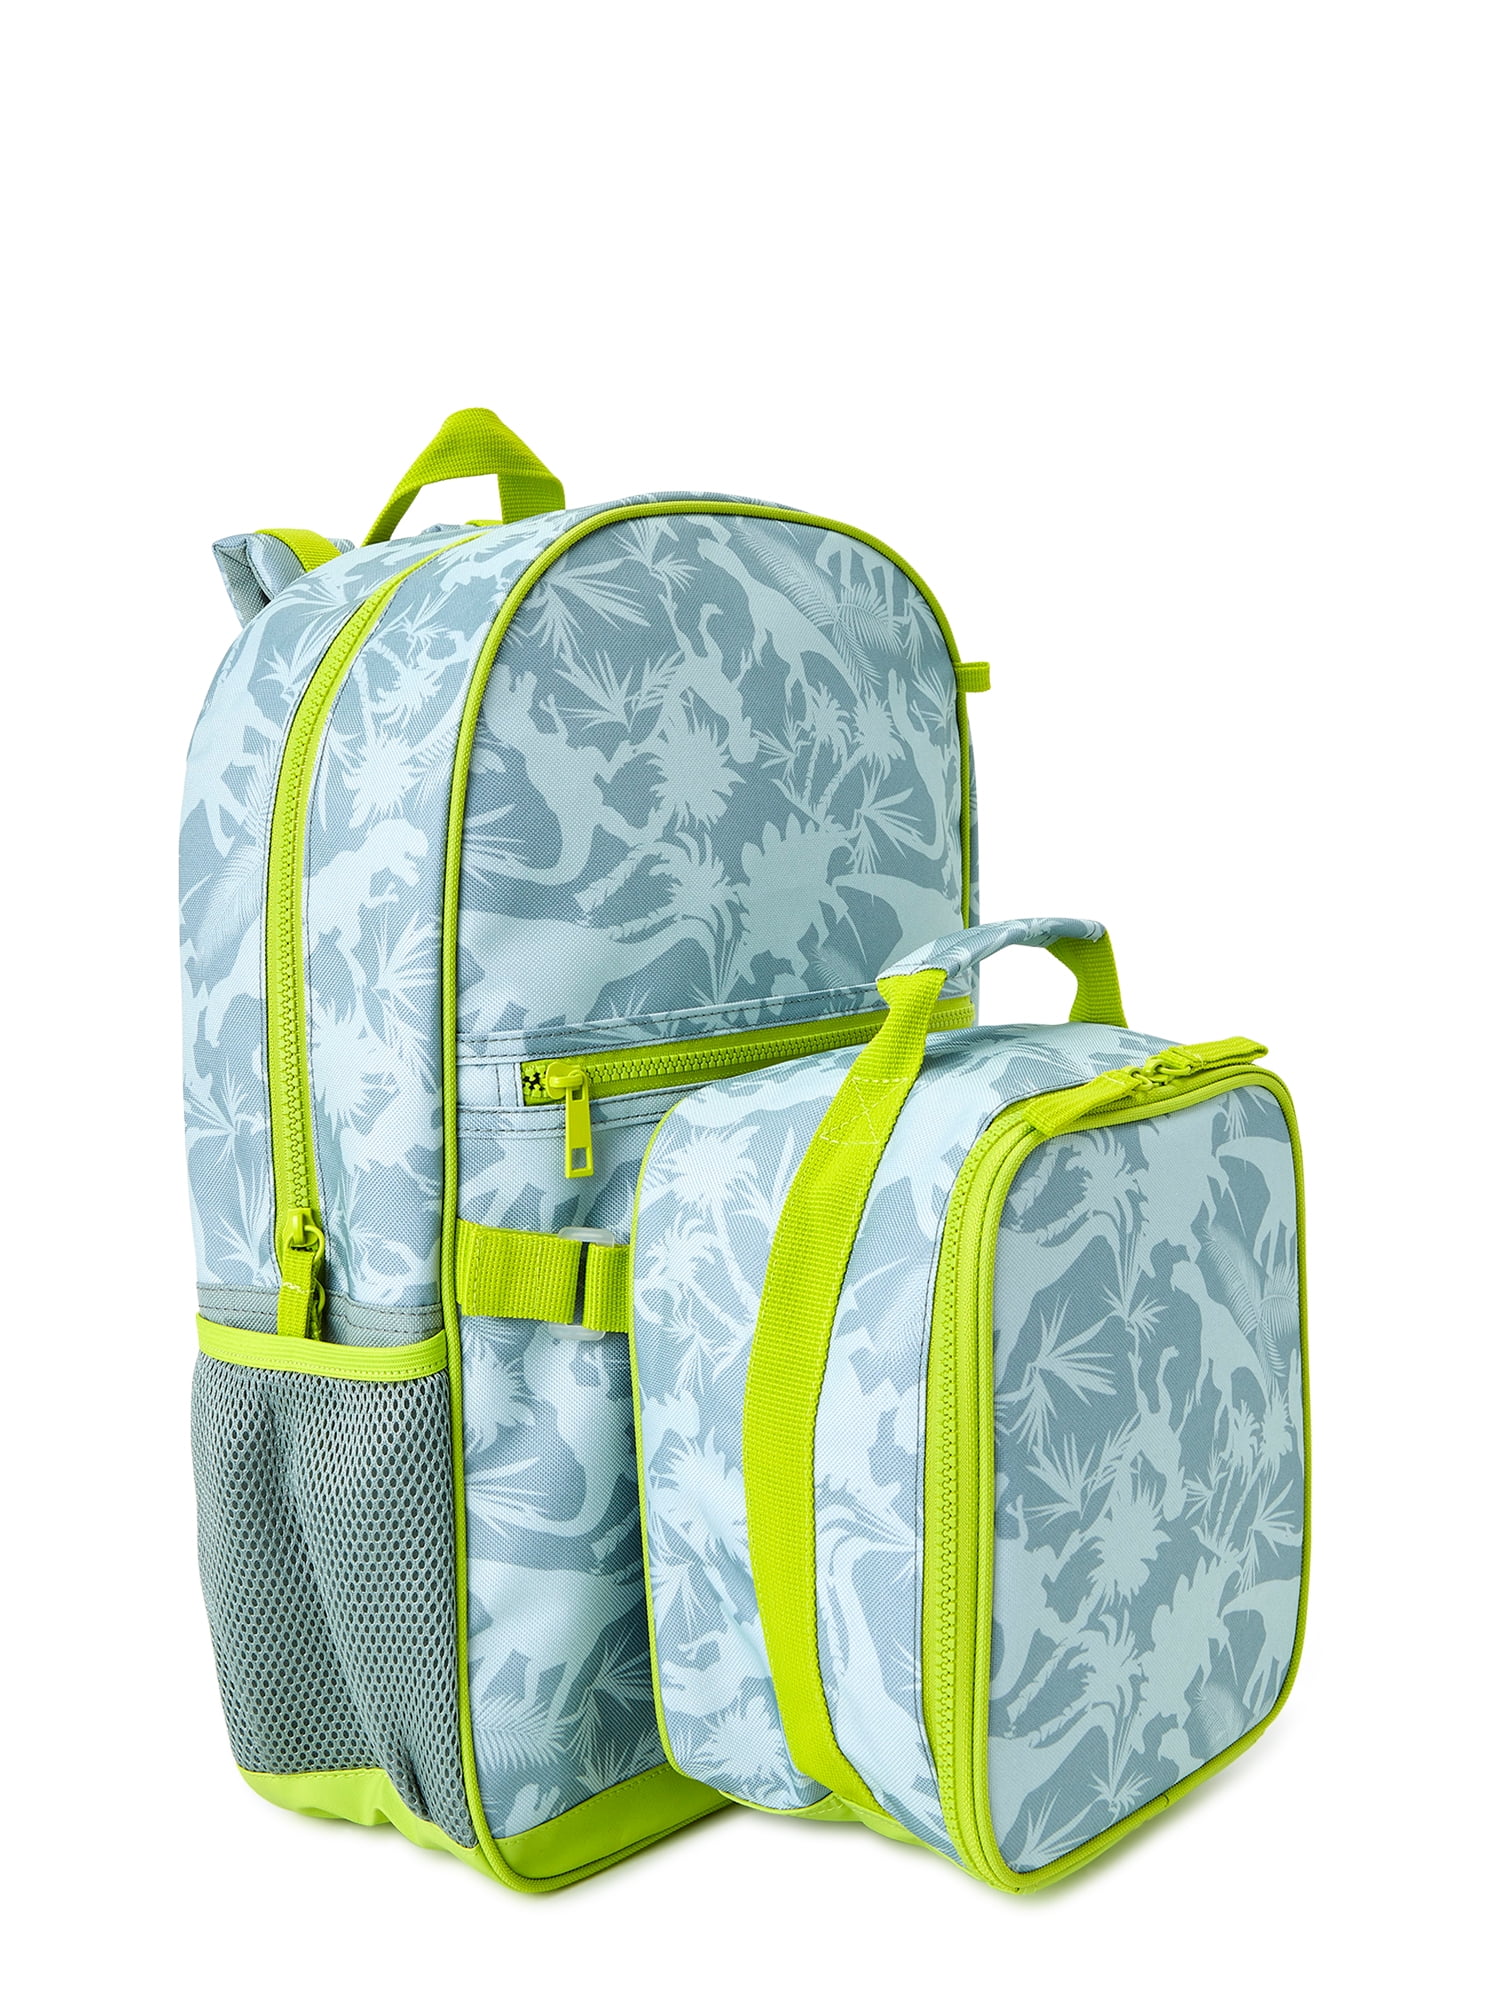 Wonder Nation Children's Backpack with Lunch Box and Pencil Case 3